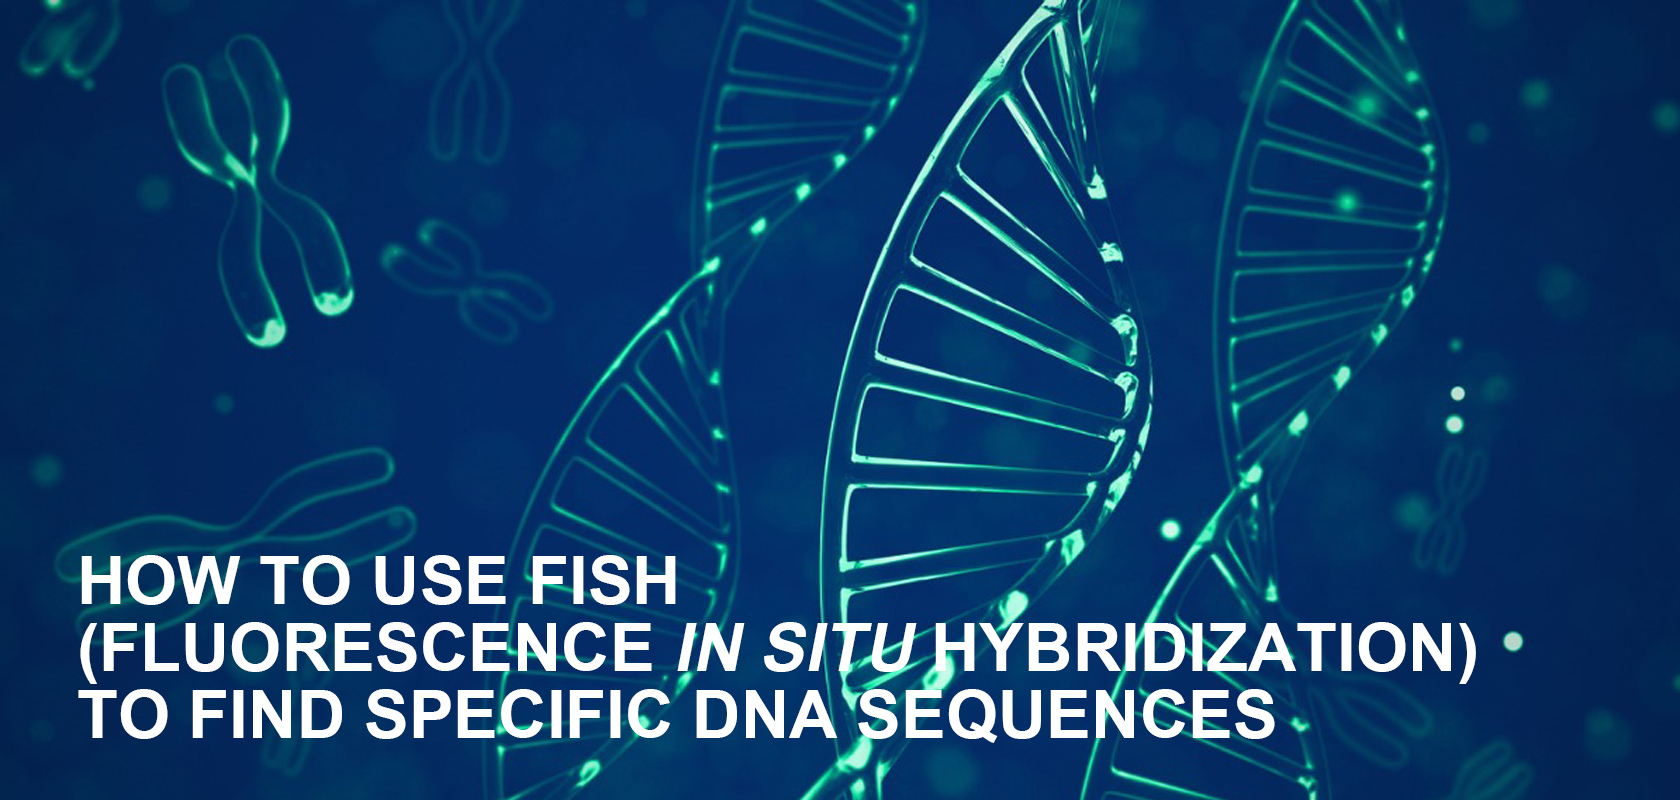 HOW TO USE FISH (FLUORESCENCE IN SITU HYBRIDIZATION) TO FIND SPECIFIC DNA SEQUENCES